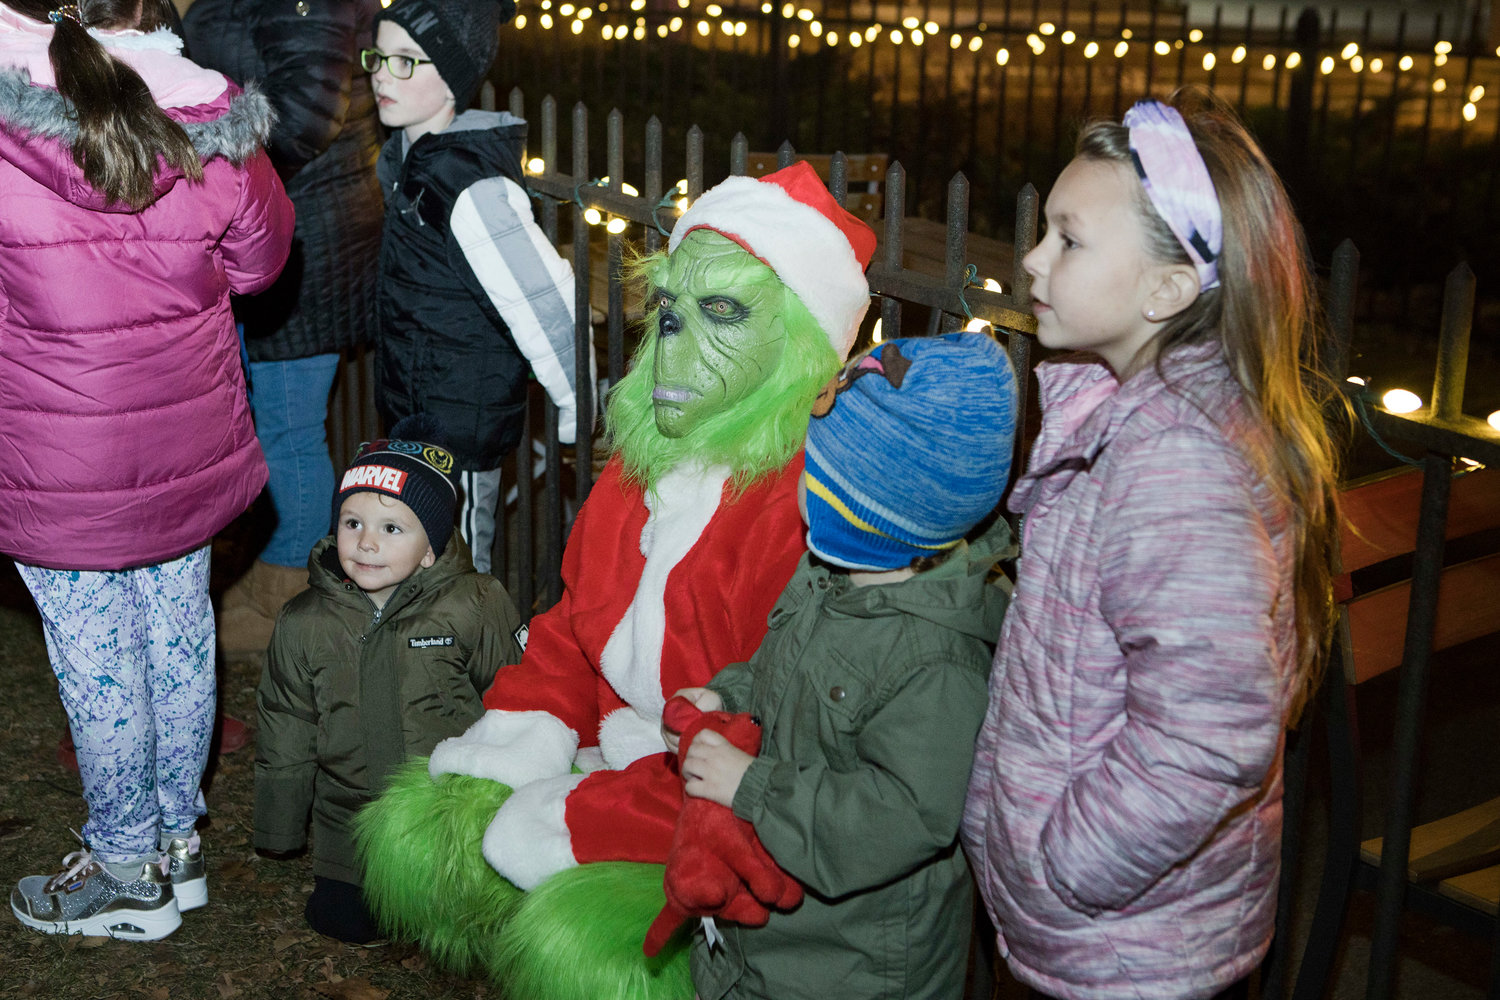 Dennis Carrier makes friends with the crowd while dressed as the “Grinch” at the Riverside Renaissance Movement Tree Lighting, Friday, Dec. 3.